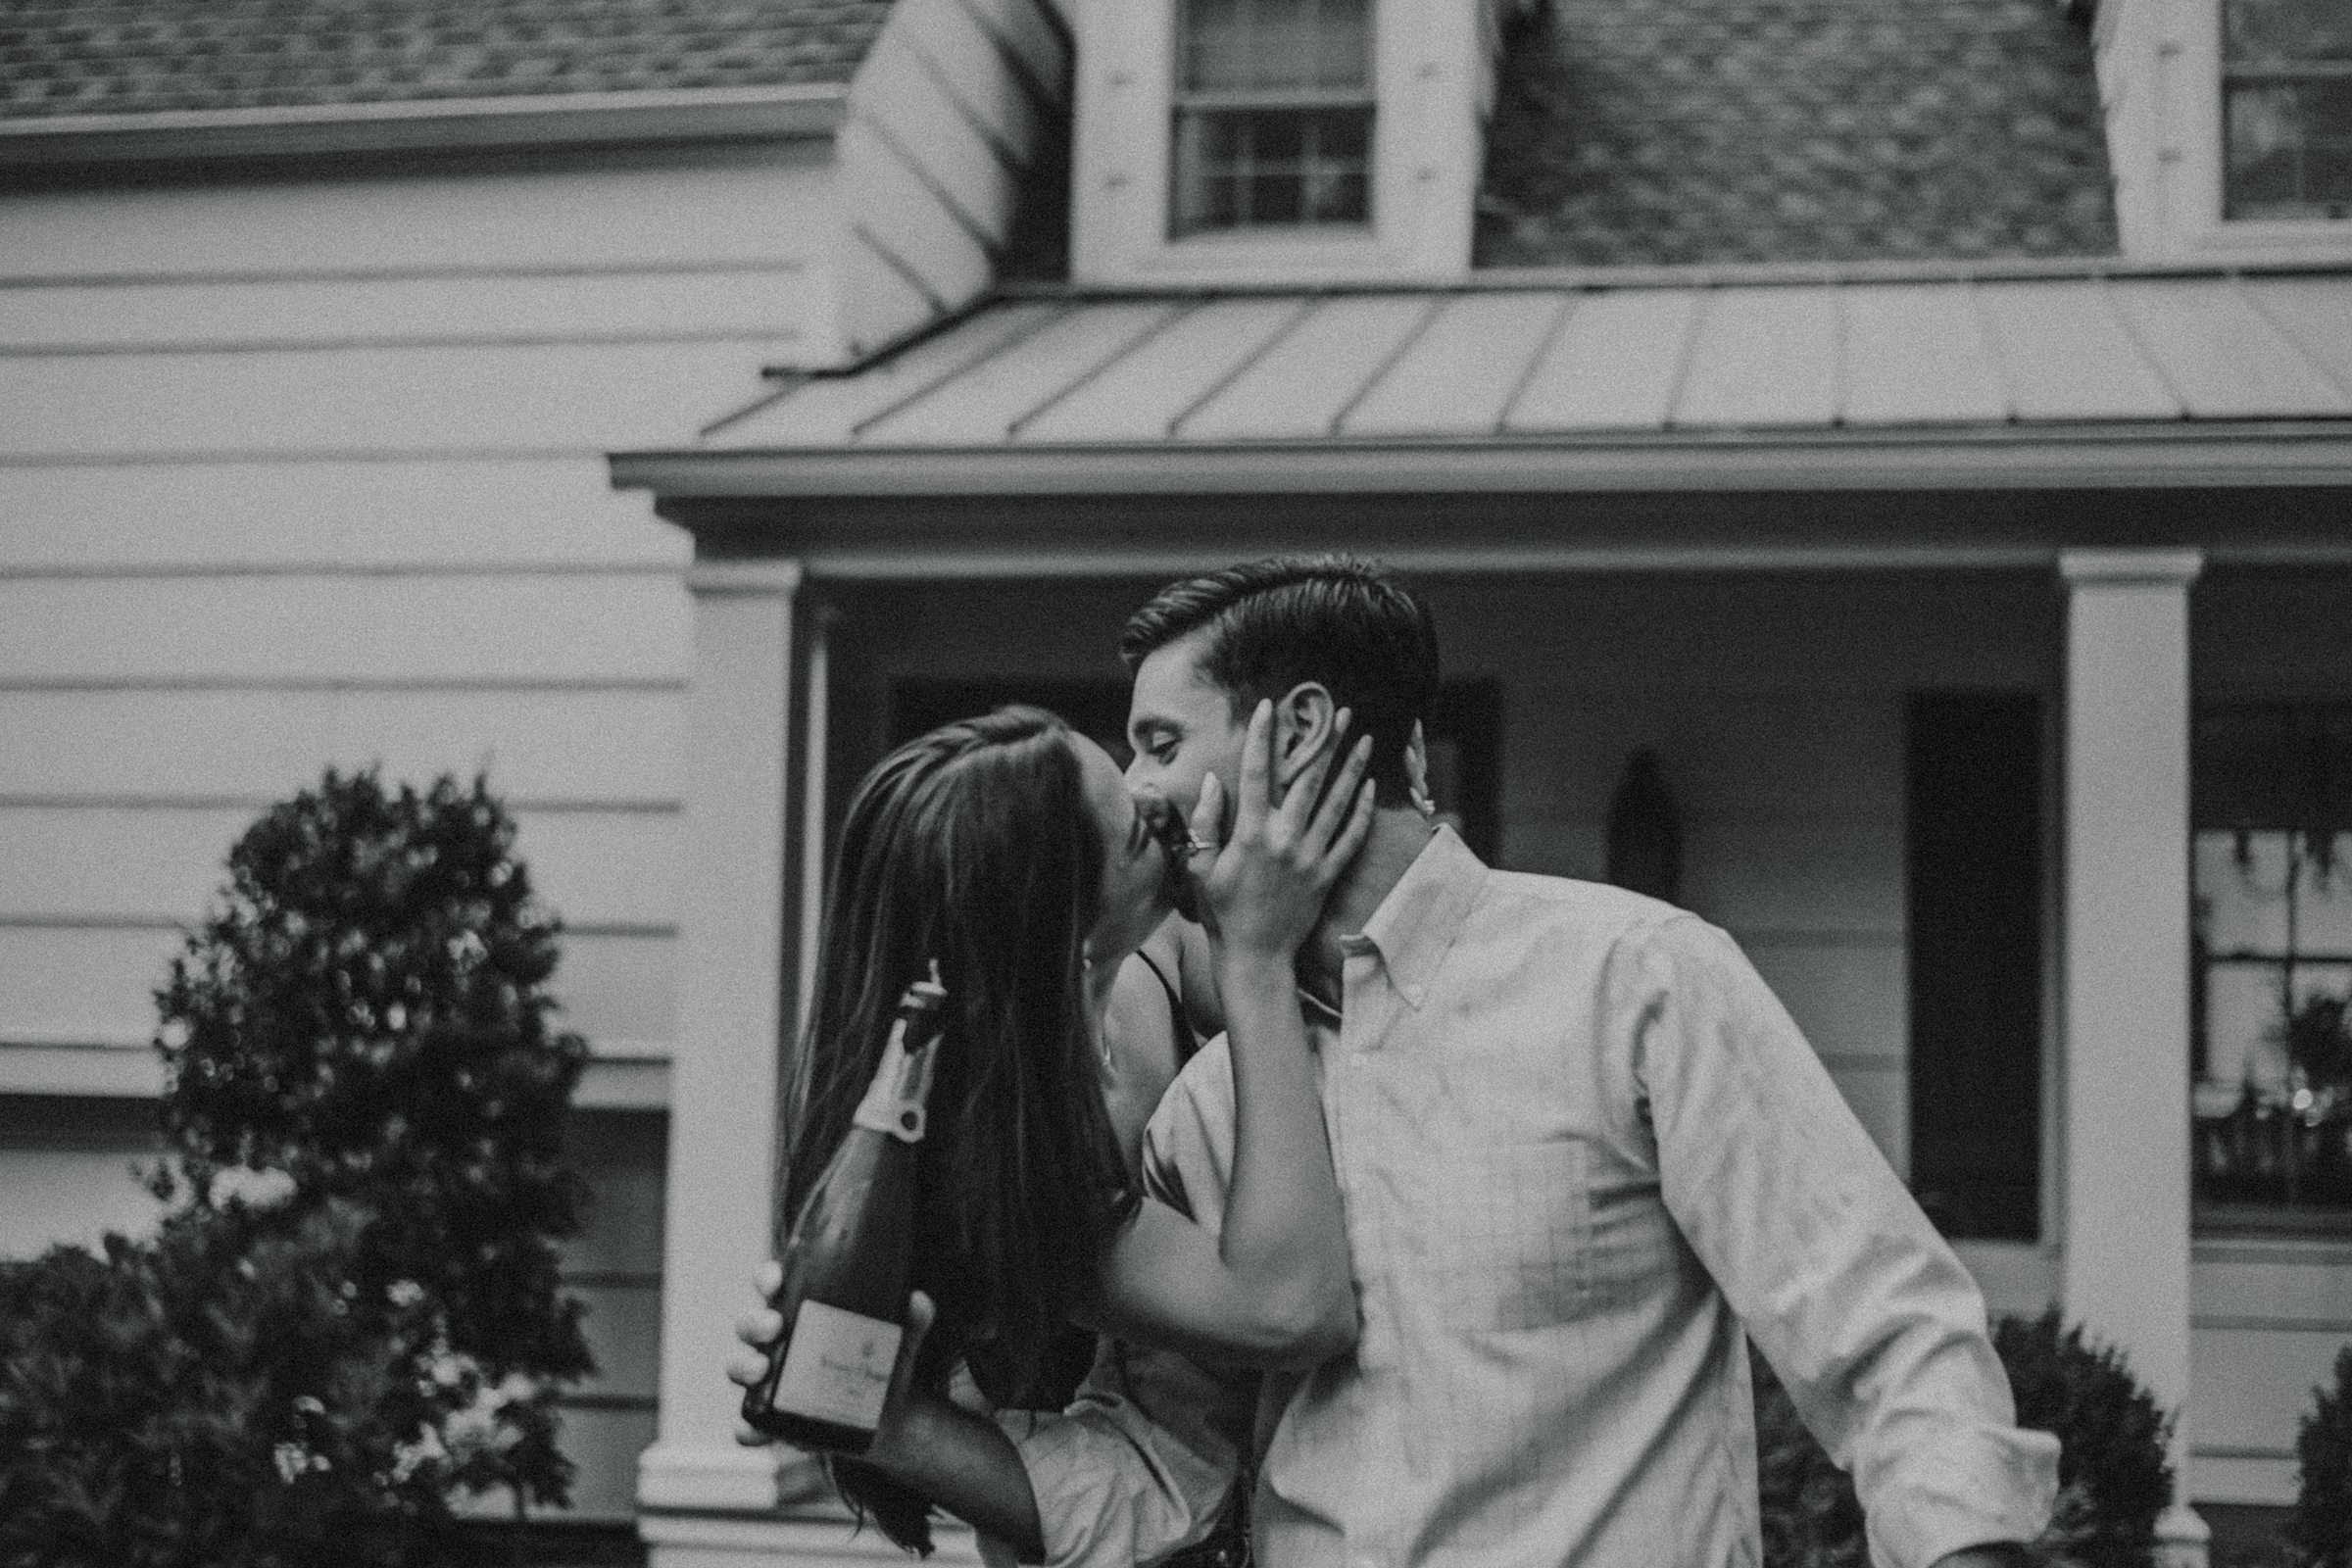 at home engagement session, New Jersey Wedding Photographer, New York Wedding Photographer, Intimate Engagement, Cozy rainy day, Chatham NJ, popping champagne